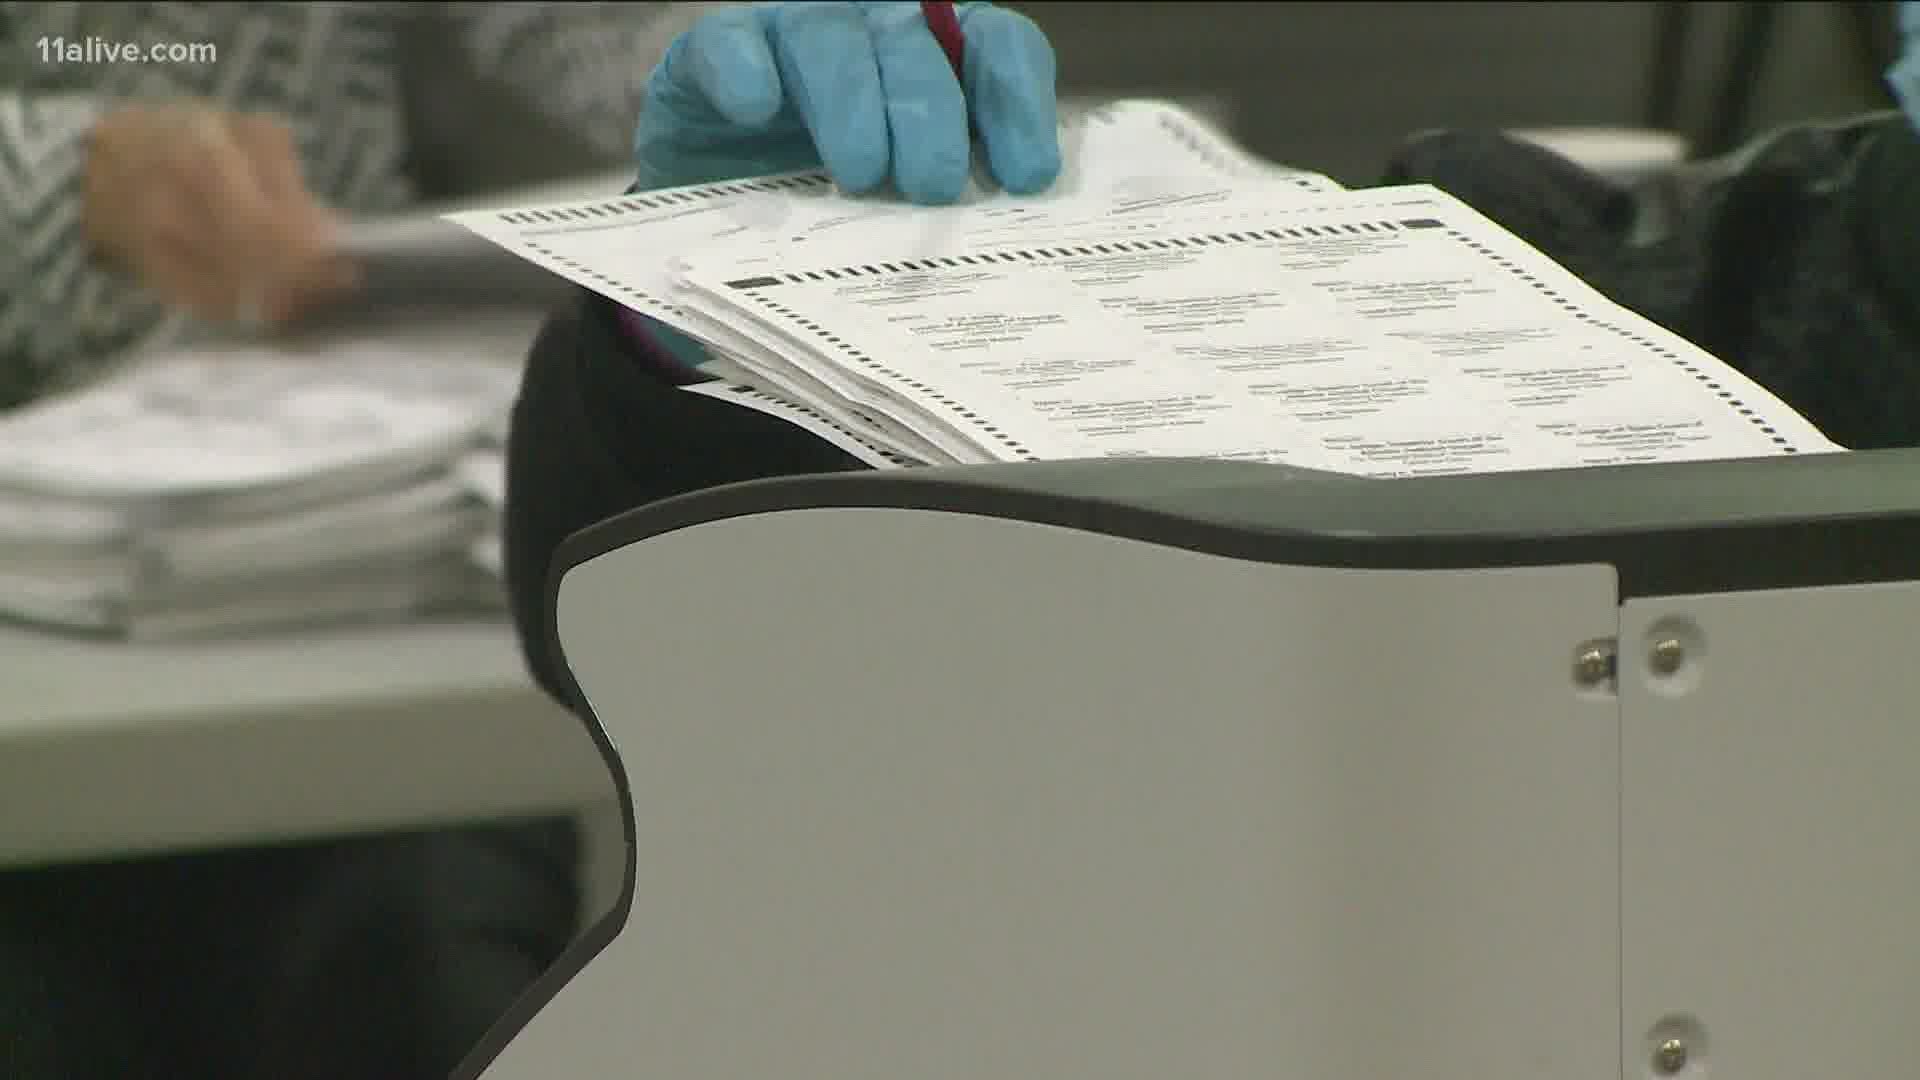 We take a closer look at how poll workers are being trained this time around.